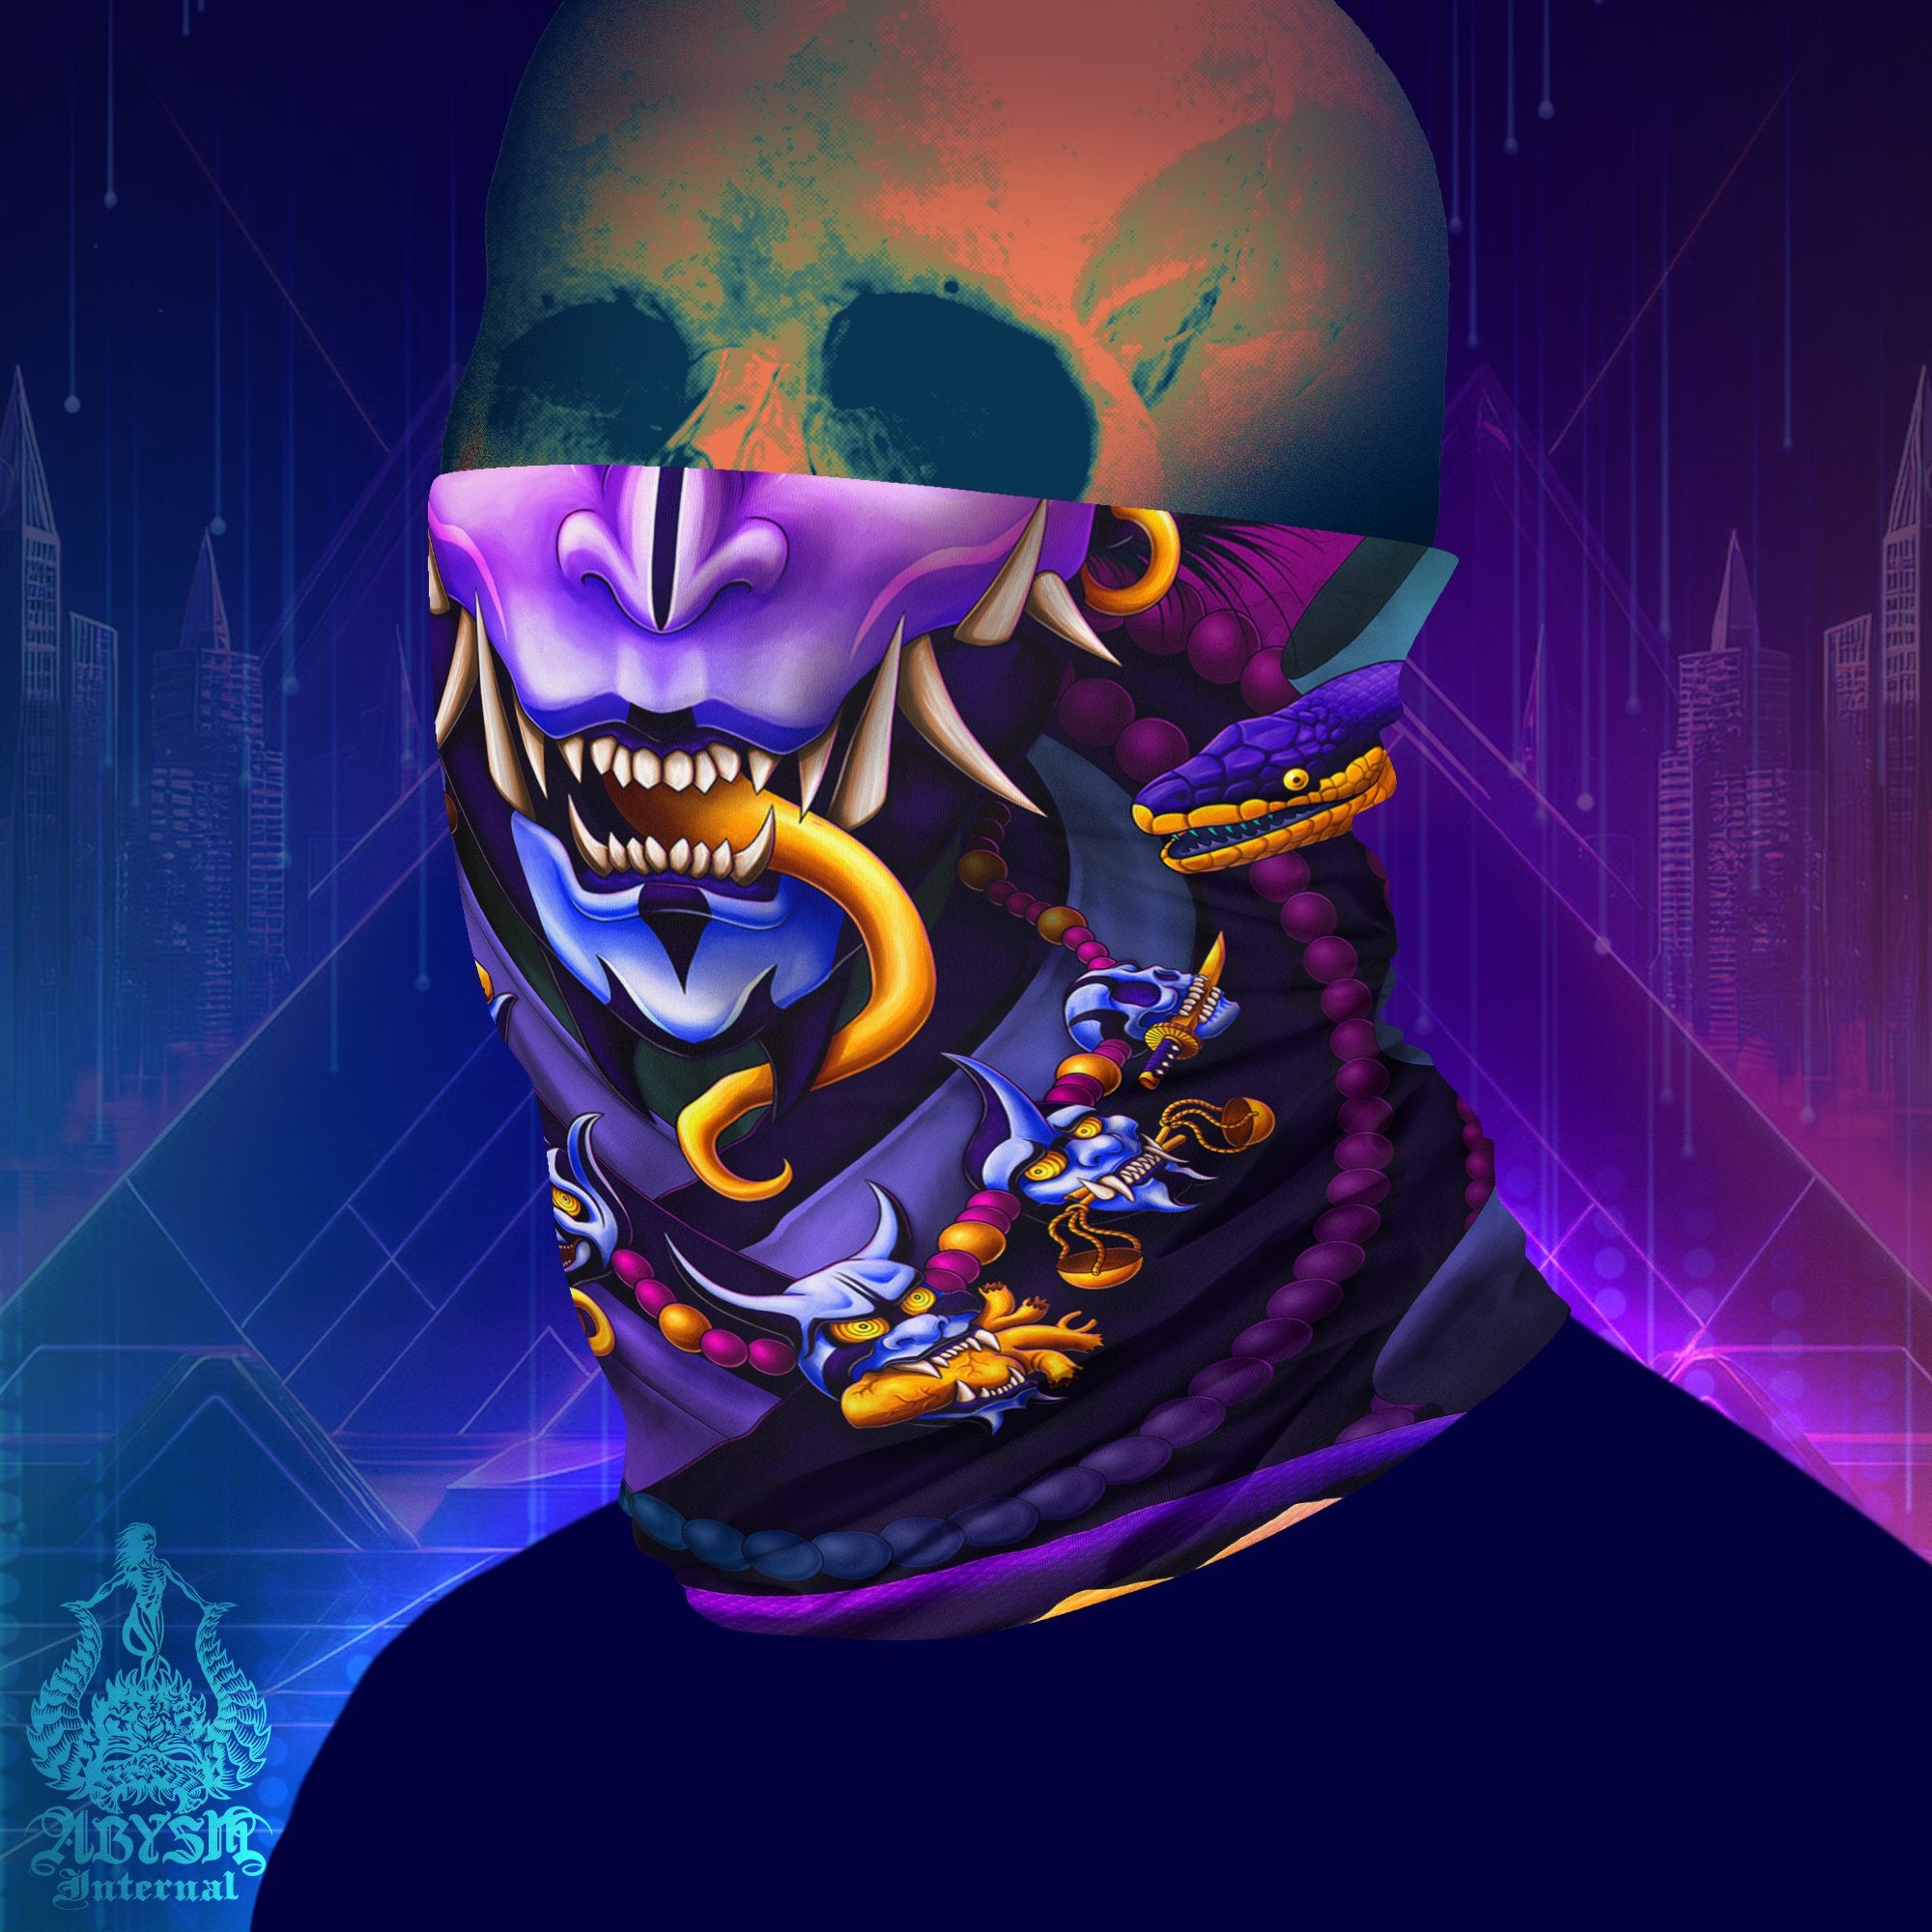 Trippy Demon Neck Gaiter, Pastel Oni Face Mask, Japanese Hannya Printed Head Covering, Psychedelic Street Outfit, Snake, Fangs, Headband - Black - Abysm Internal